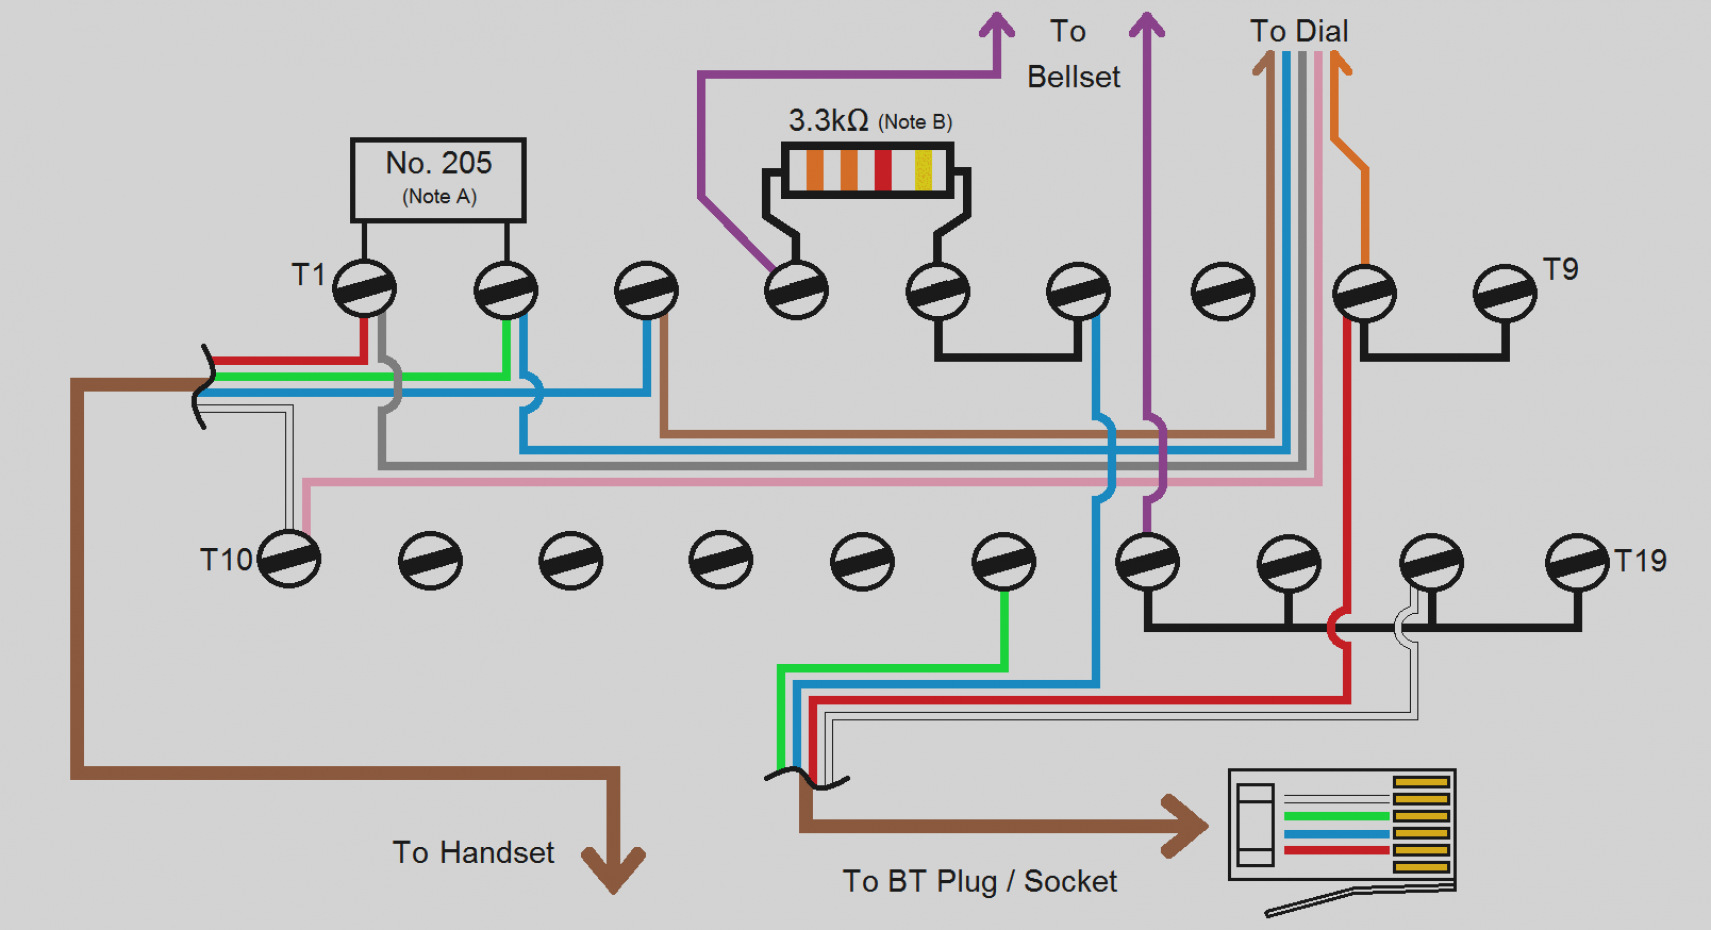 Cat 5 Wiring Diagram For Telephone